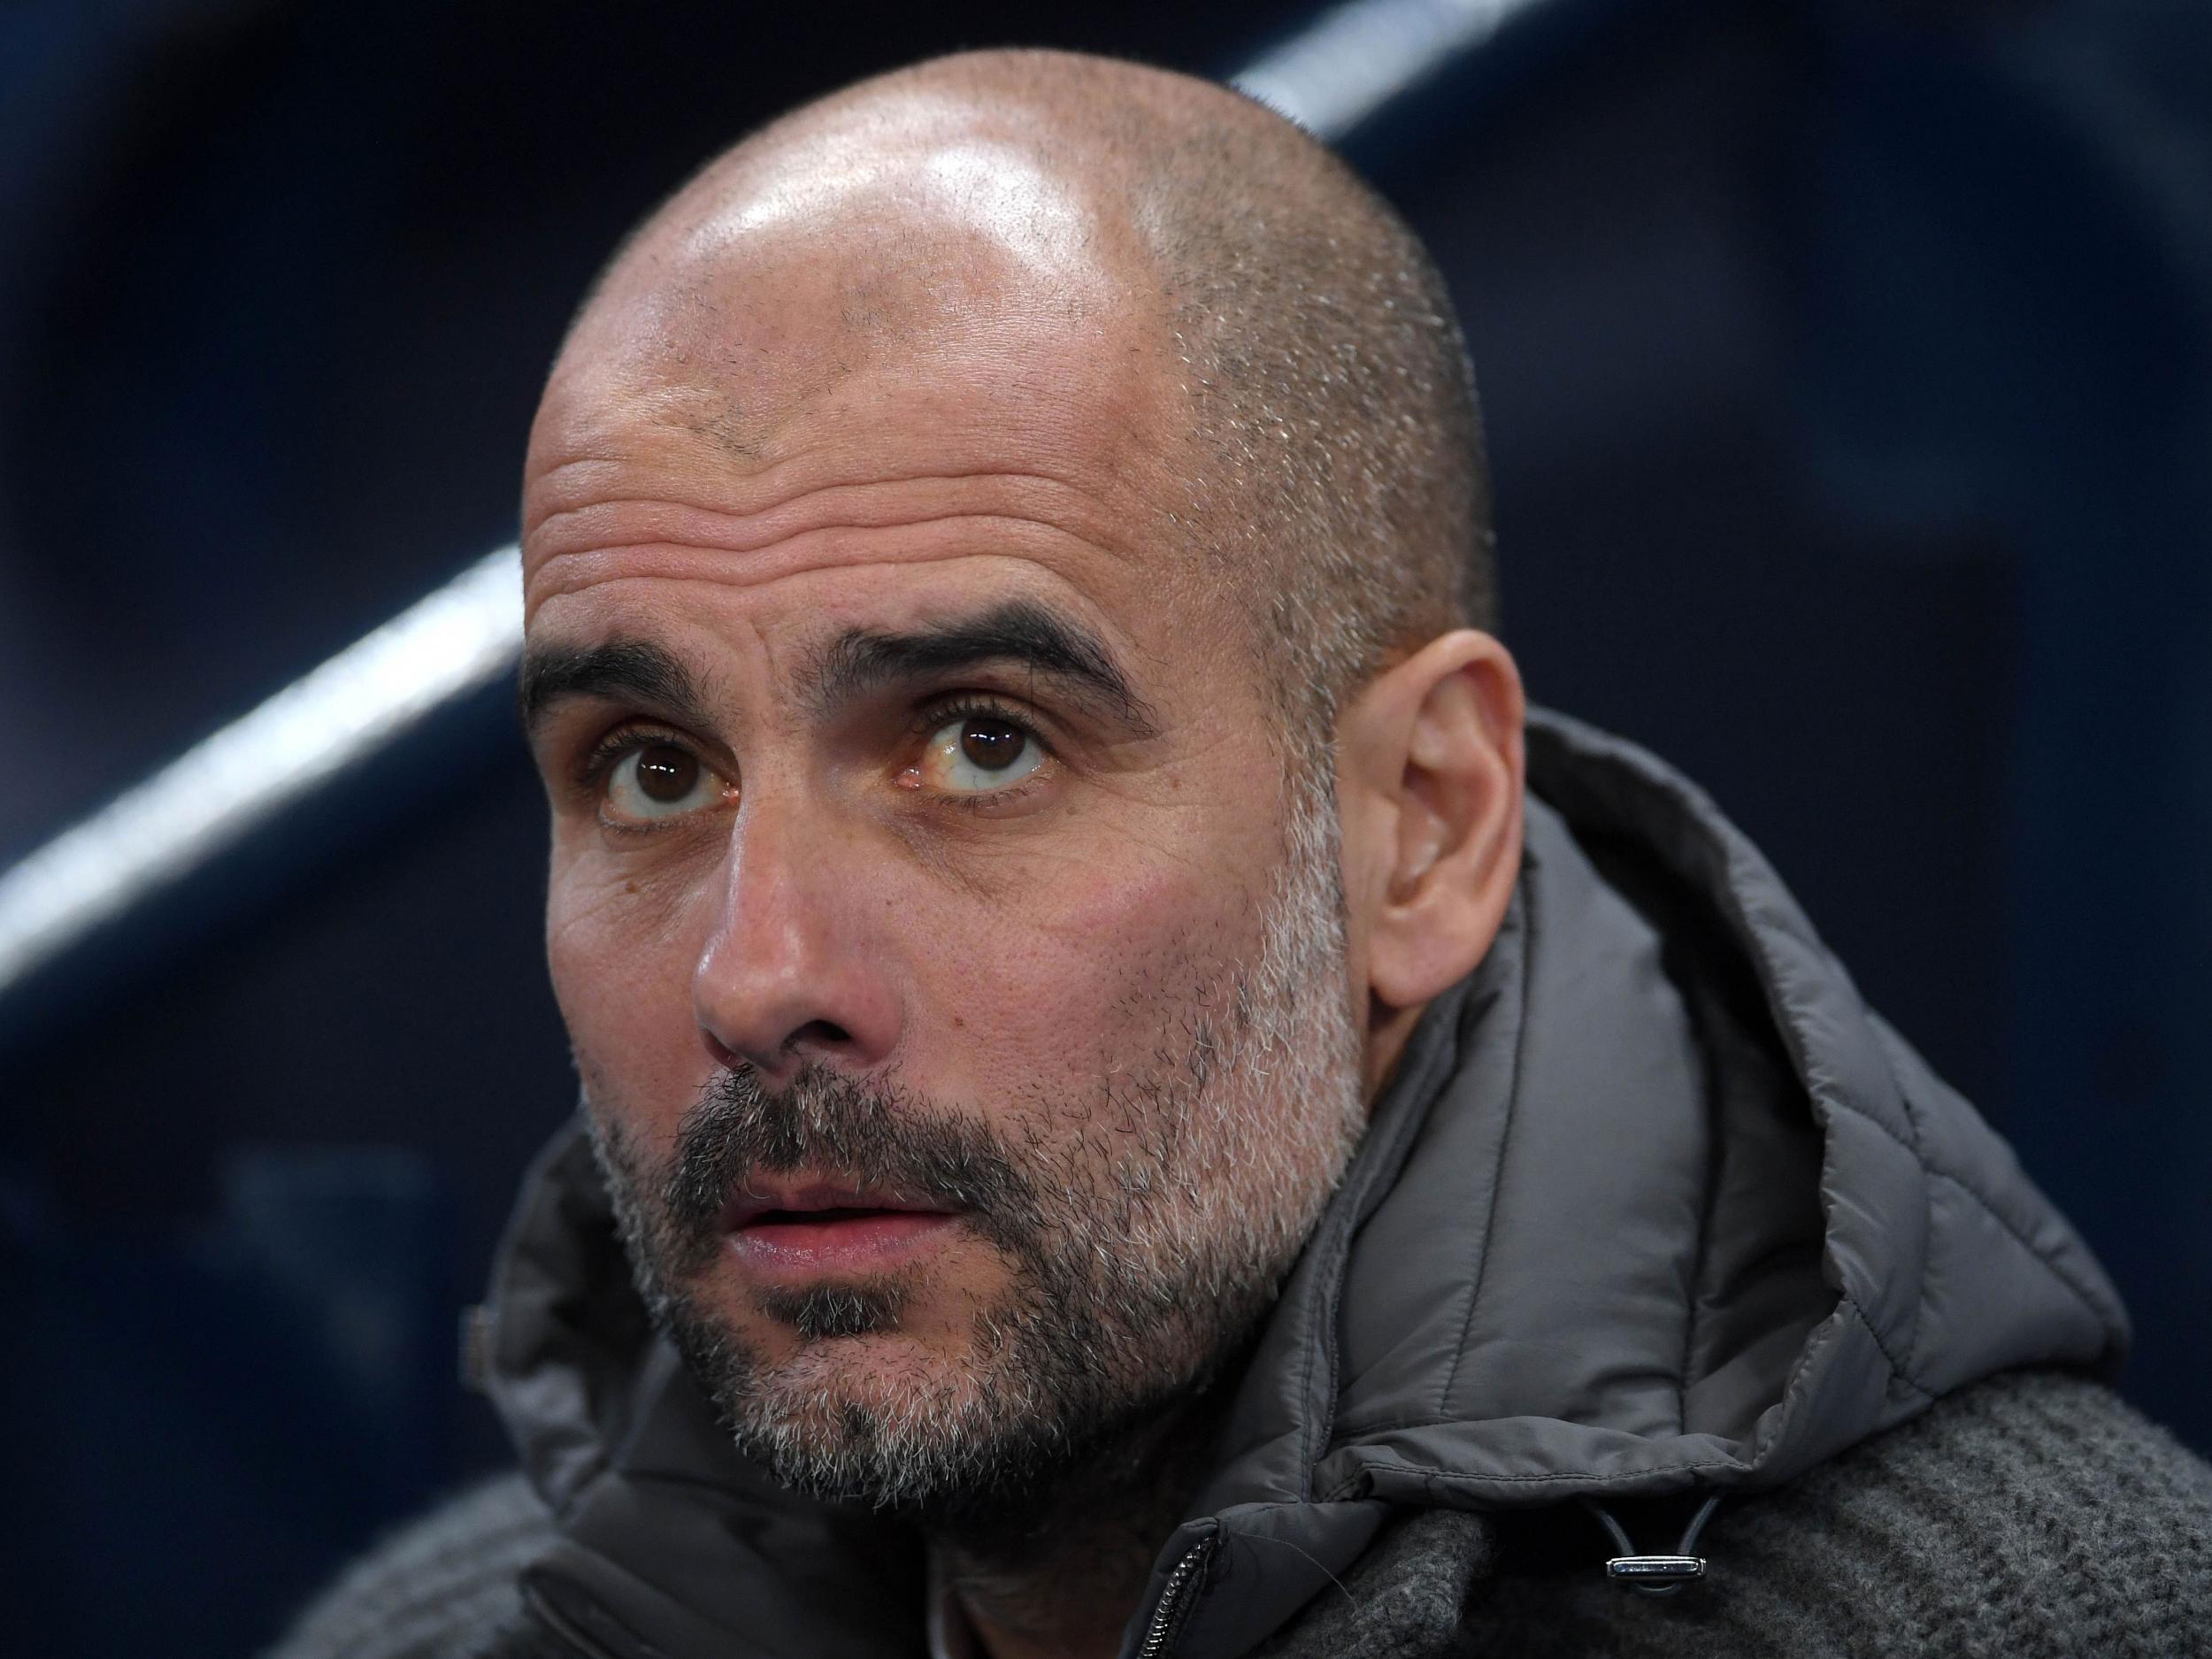 Pep Guardiola could be hampered by a two-window transfer embargo